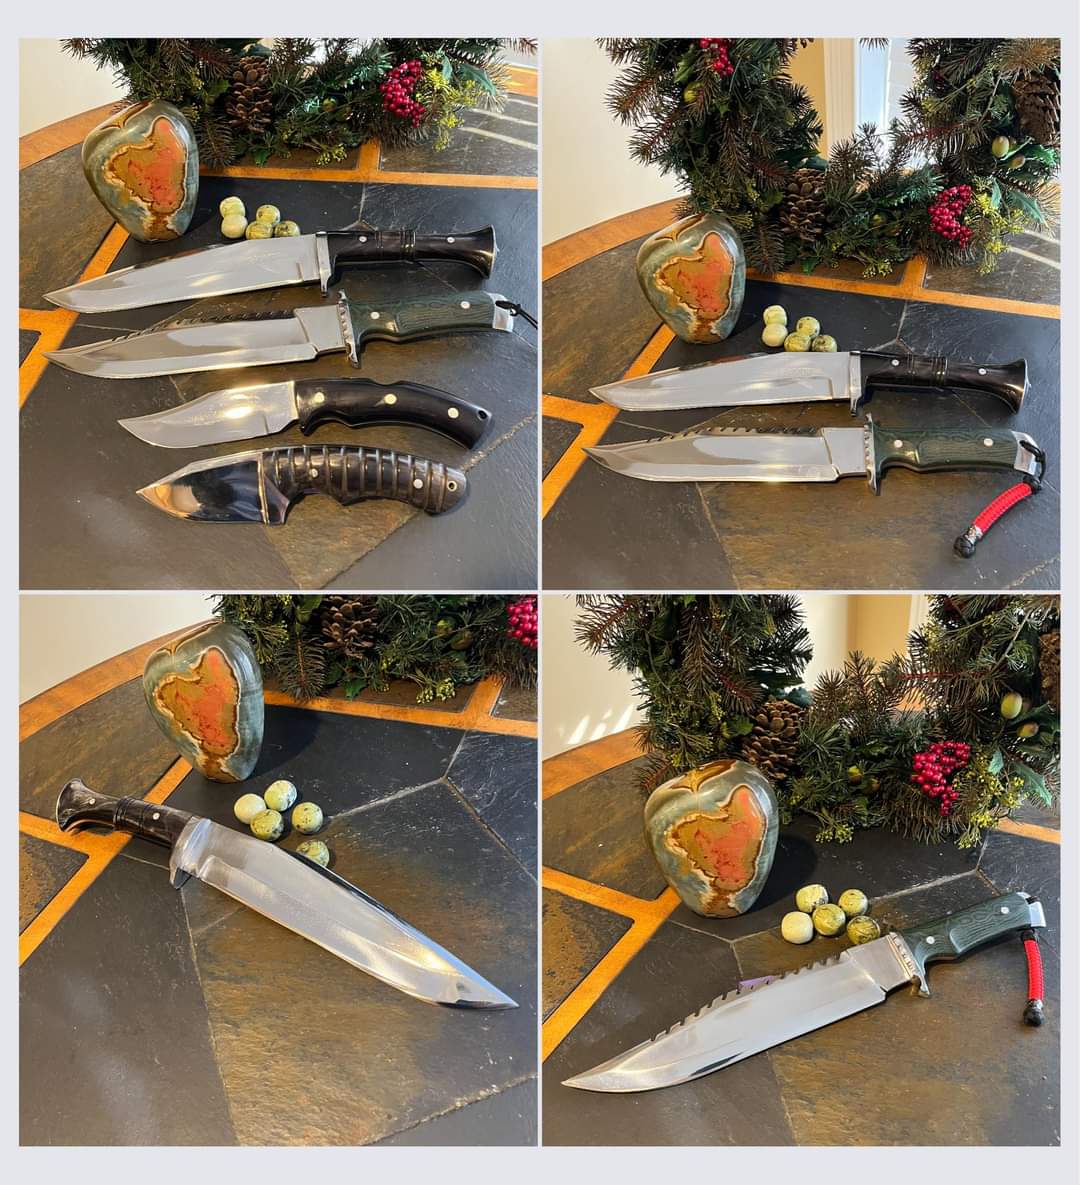 khhi dbad knife collection